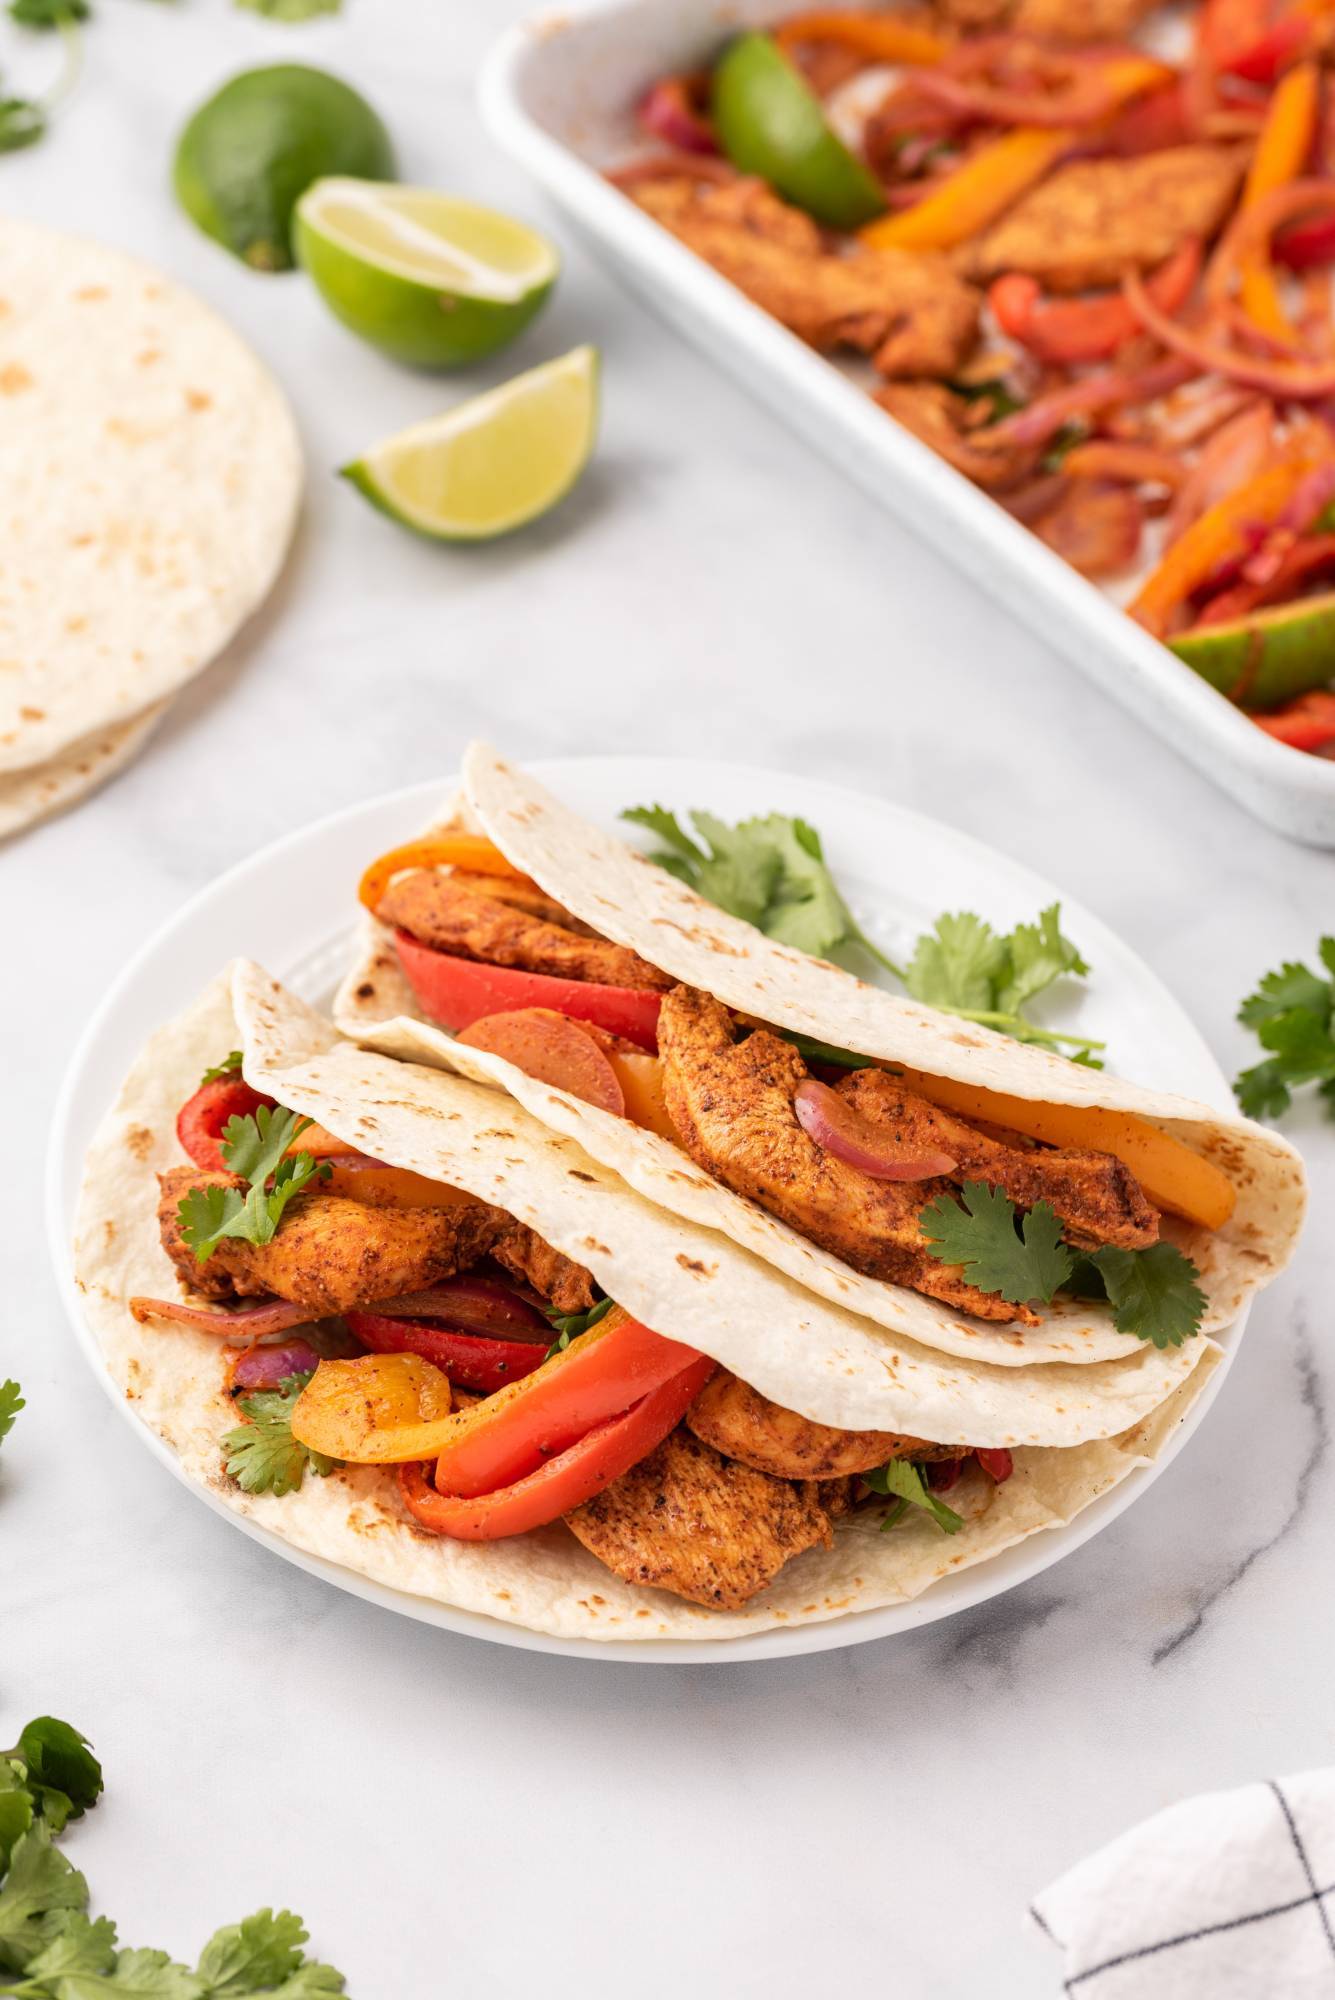 Chicken fajitas made on a sheet pan and served in flour tortillas with bell peppers, cilantro, lime, and red onion.